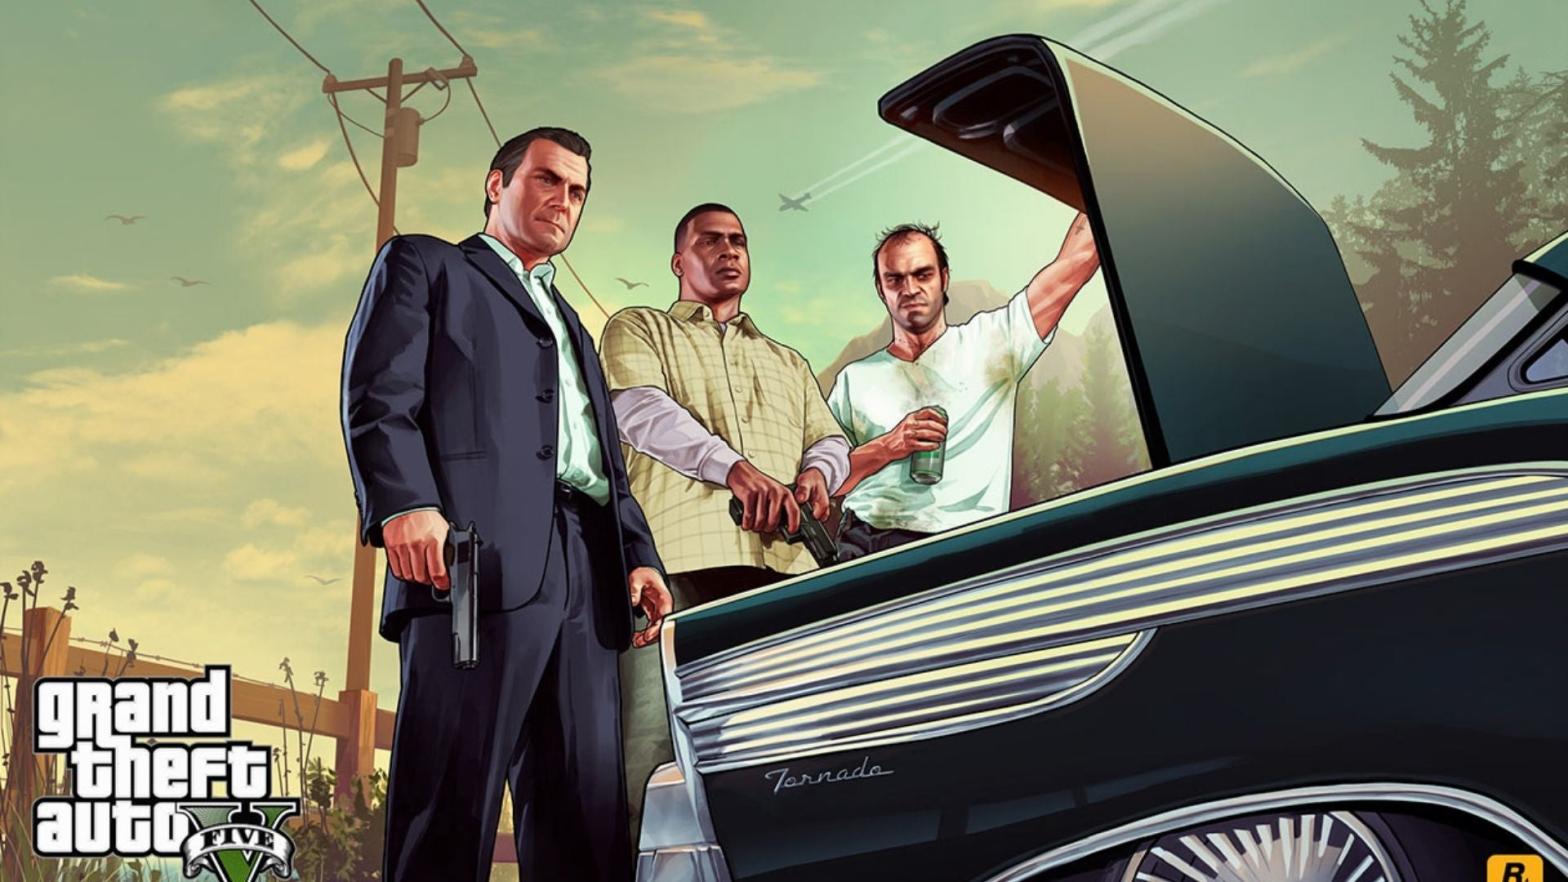 On November 11, you'll be able to own GTA V on yet another console generation. (Image: Rockstar Games)